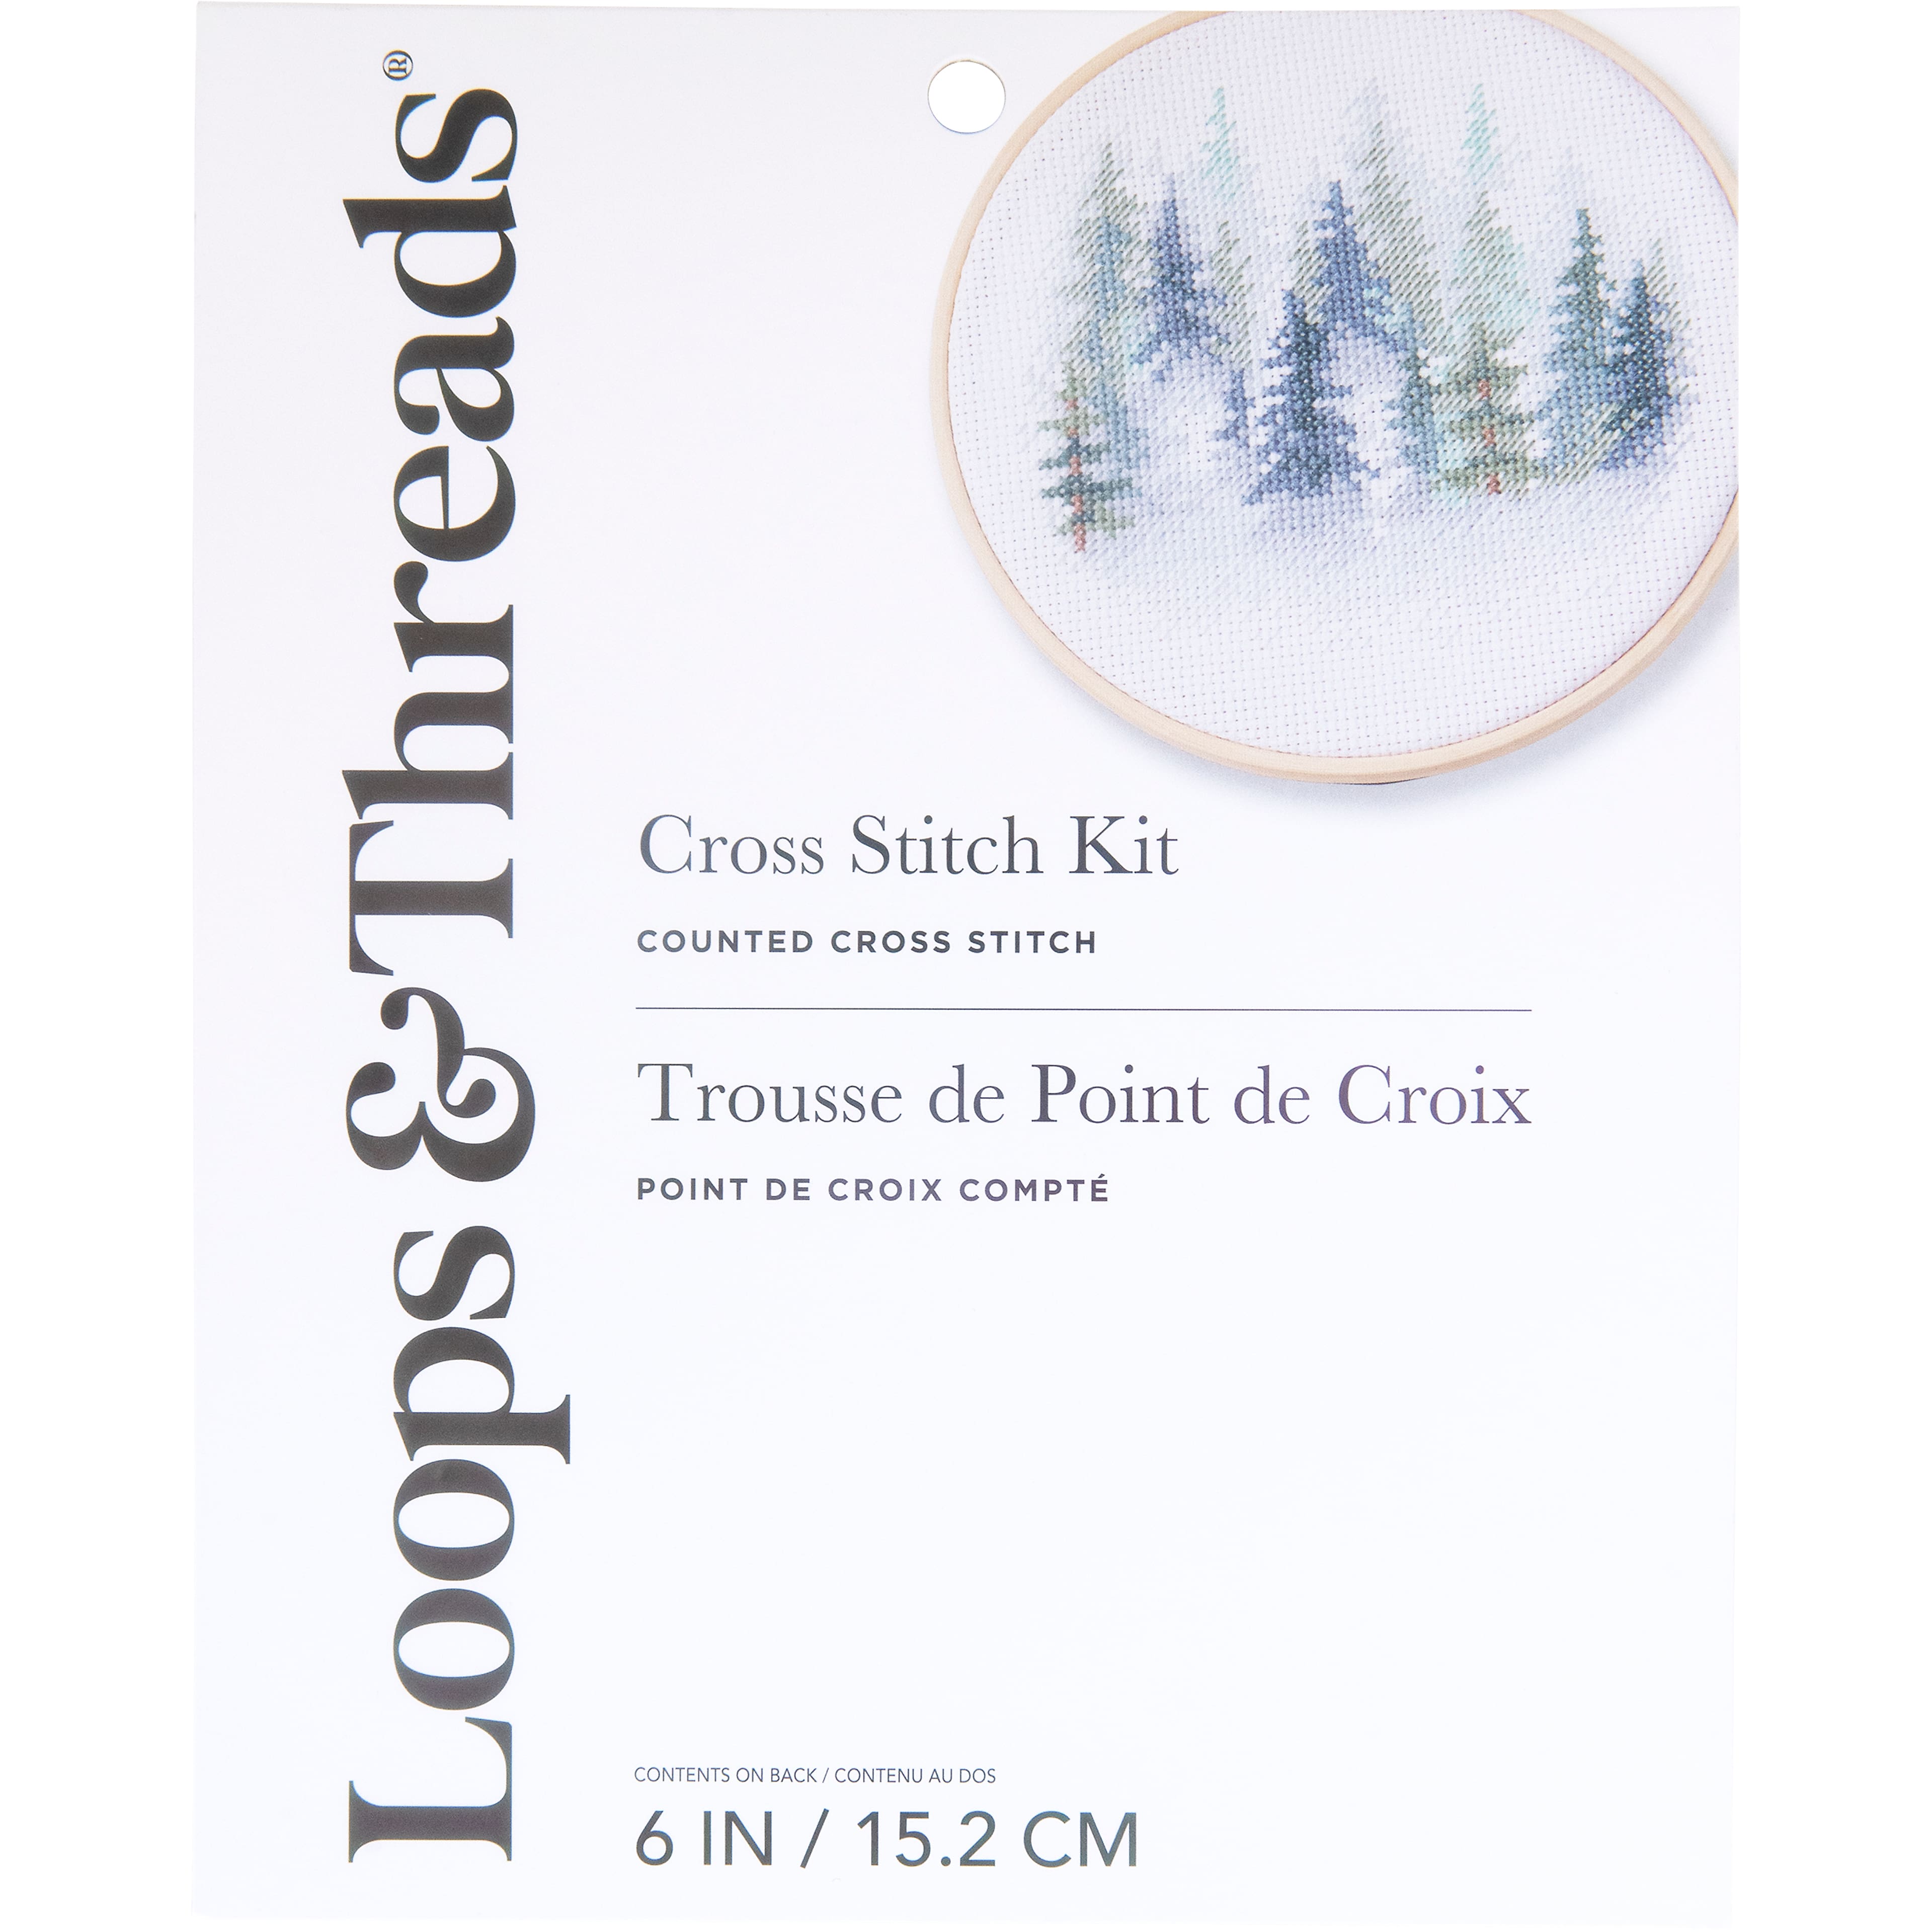 Trees Counted Cross Stitch Kit by Loops &#x26; Threads&#xAE;